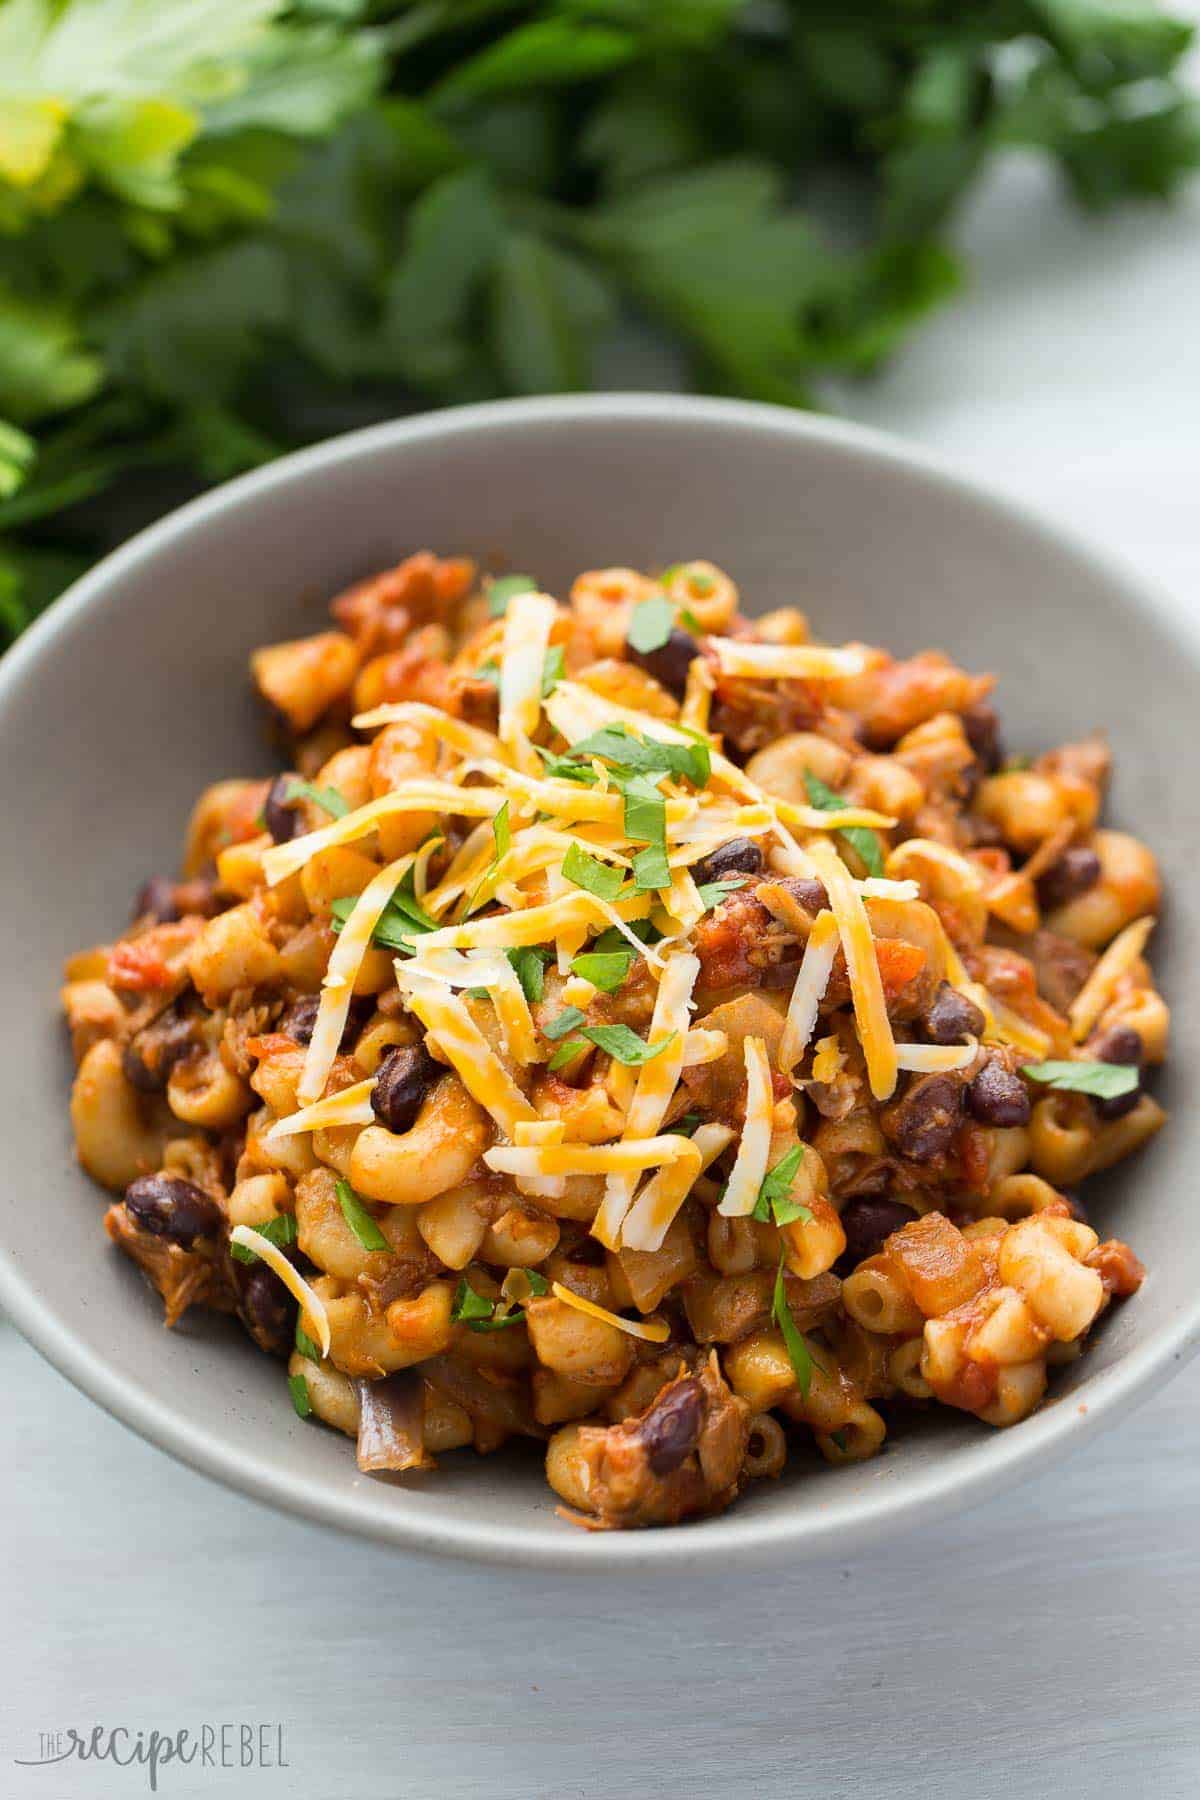 Slow Cooker BBQ Chicken Chili Mac is a hearty one pot pasta meal that cooks completely in the crockpot!